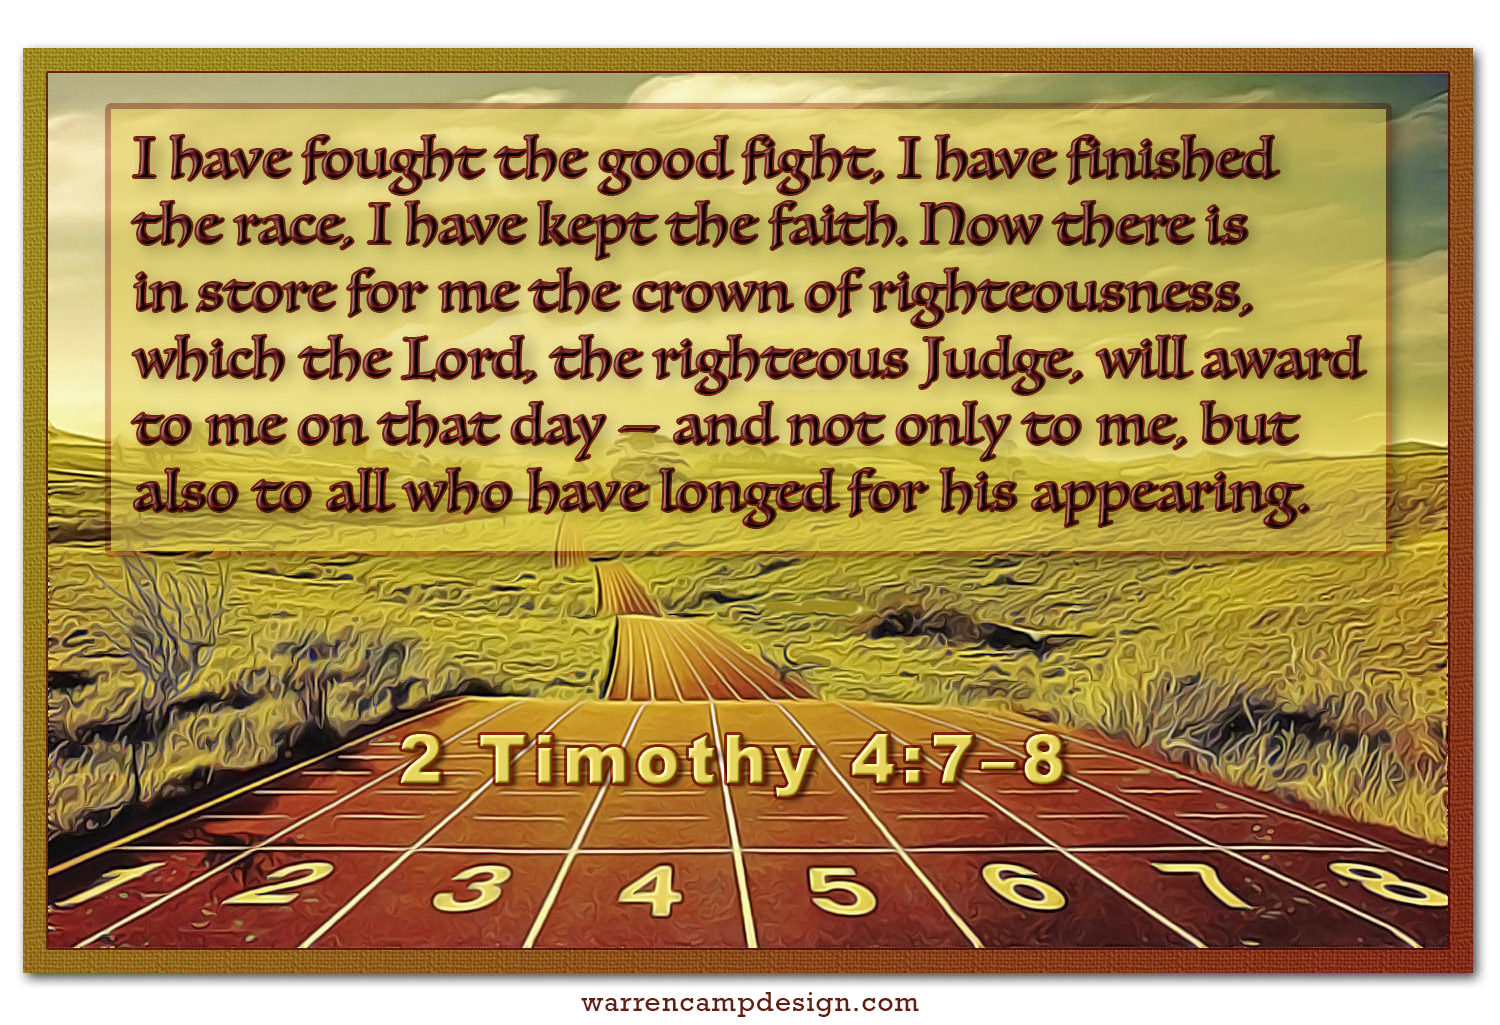 Scripture picture of 2 Timothy 4:7-8, emphasizing the importance of finishing the race, in faith, and gaining the crown of righteousness.